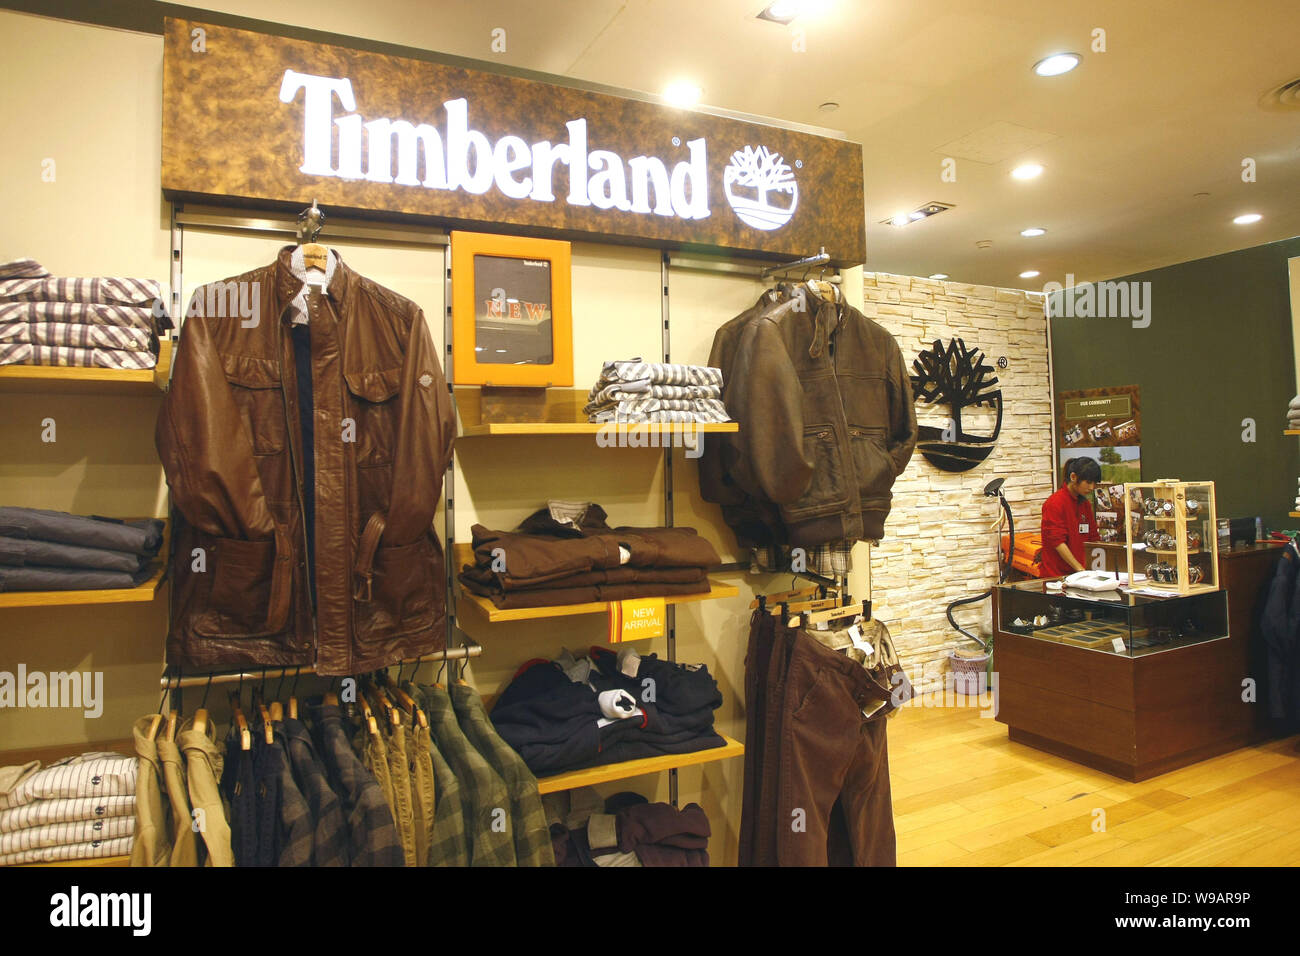 Timberland store at a department store 